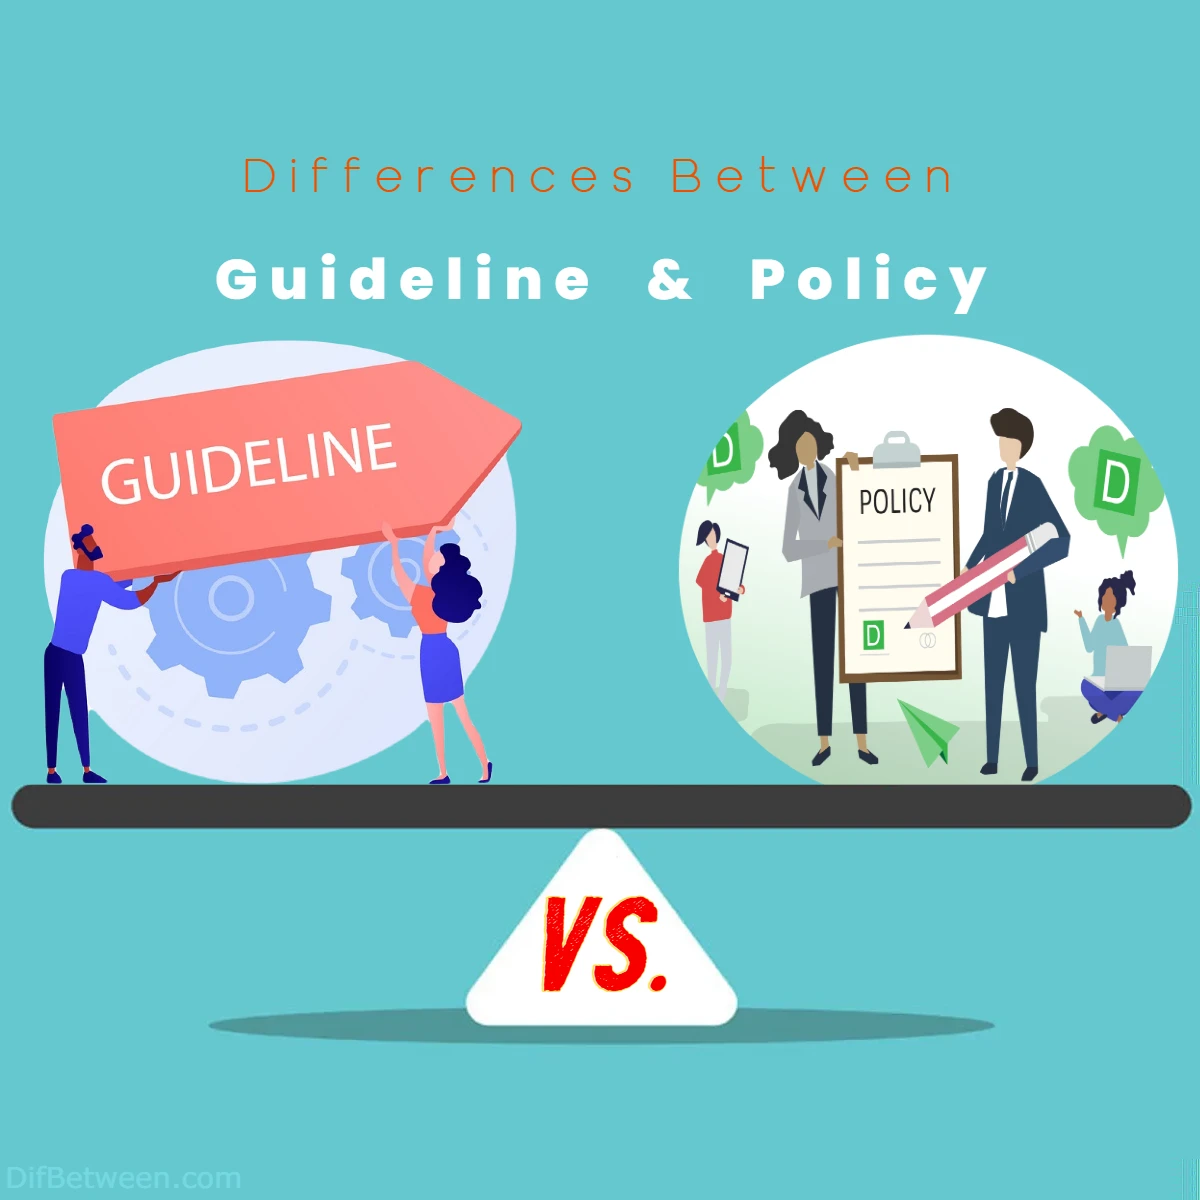 Differences Between Guideline vs Policy